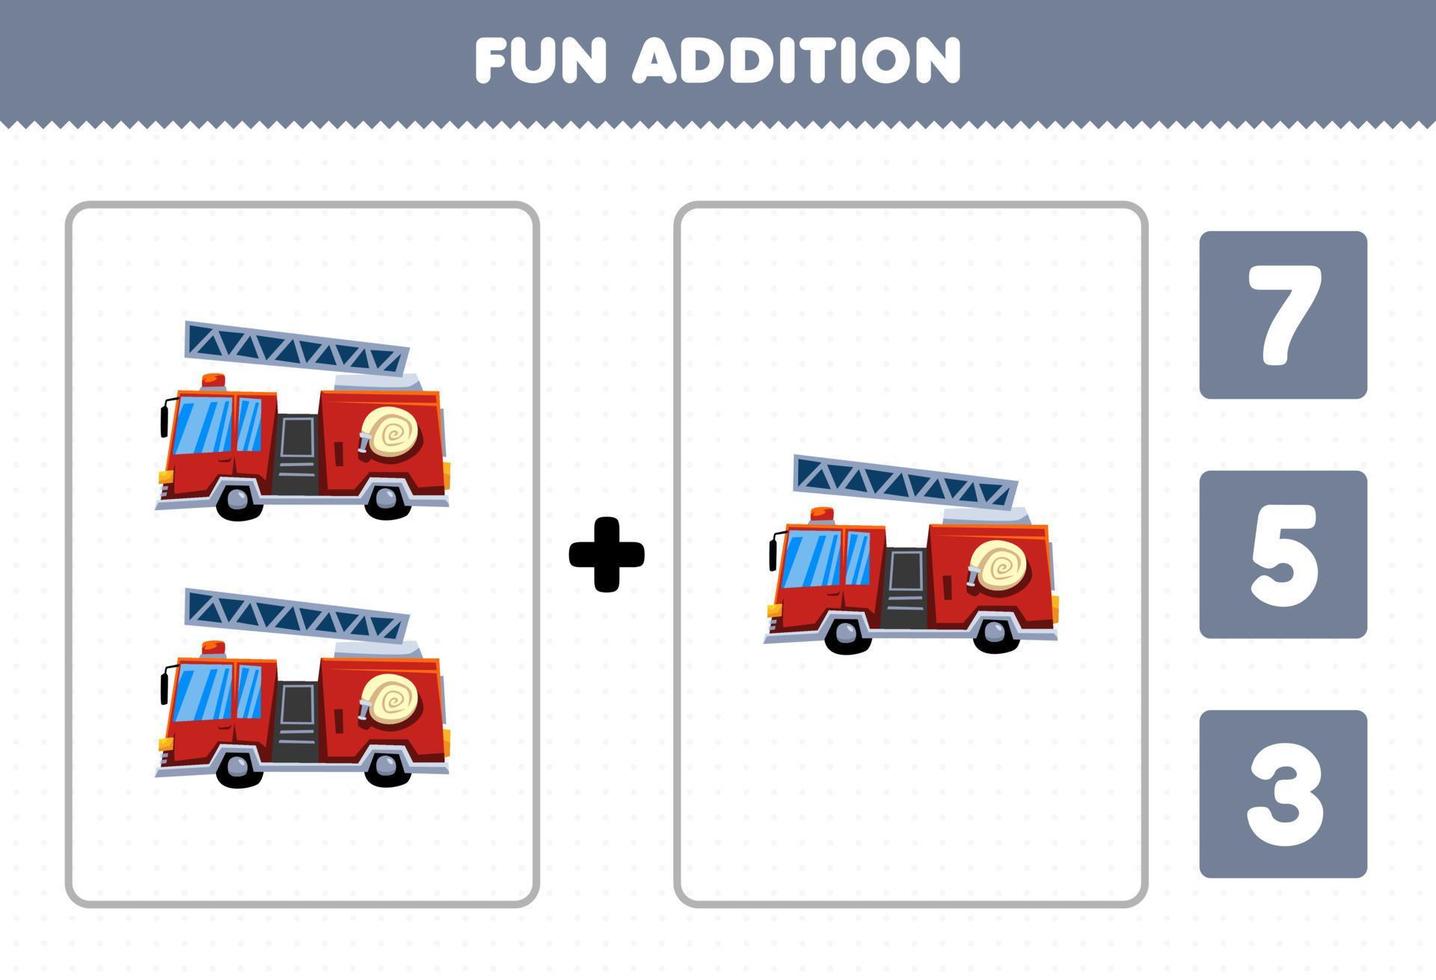 Education game for children fun addition by count and choose the correct answer of cartoon rescue transportation firetruck printable worksheet vector